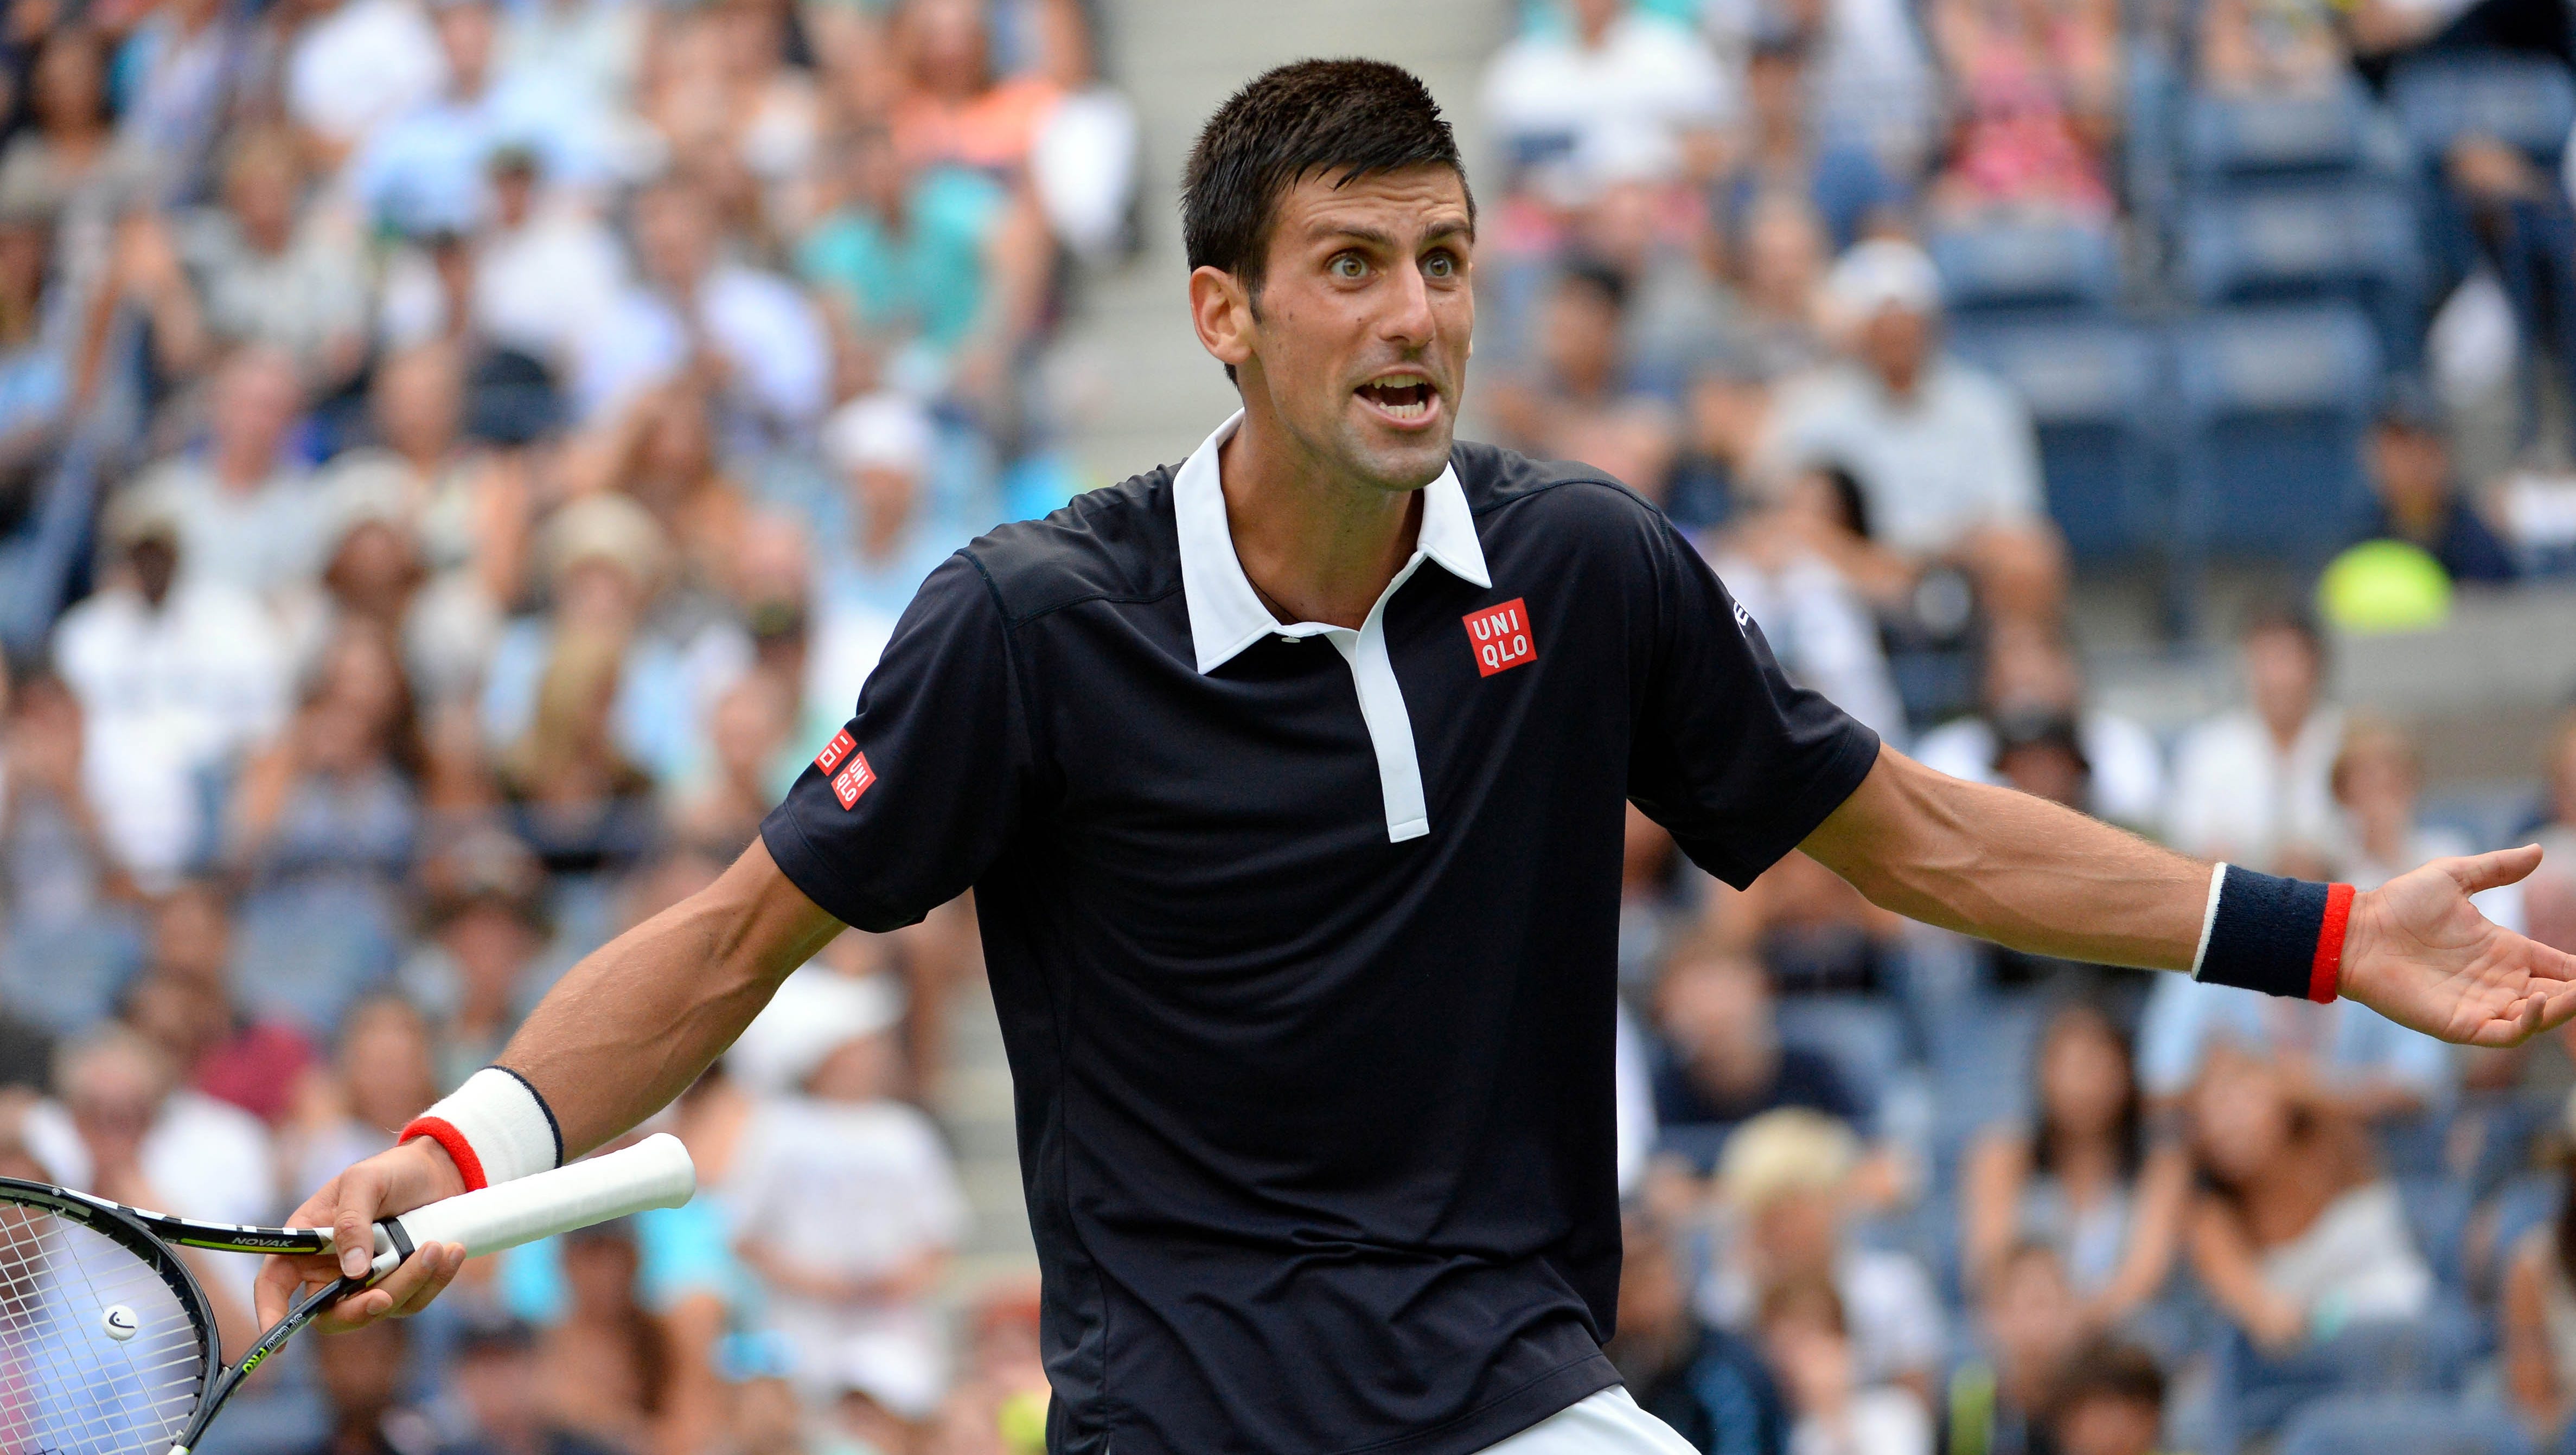 Djokovic Others Say No To Espn Mid Match Interviews But Idea Could Catch On